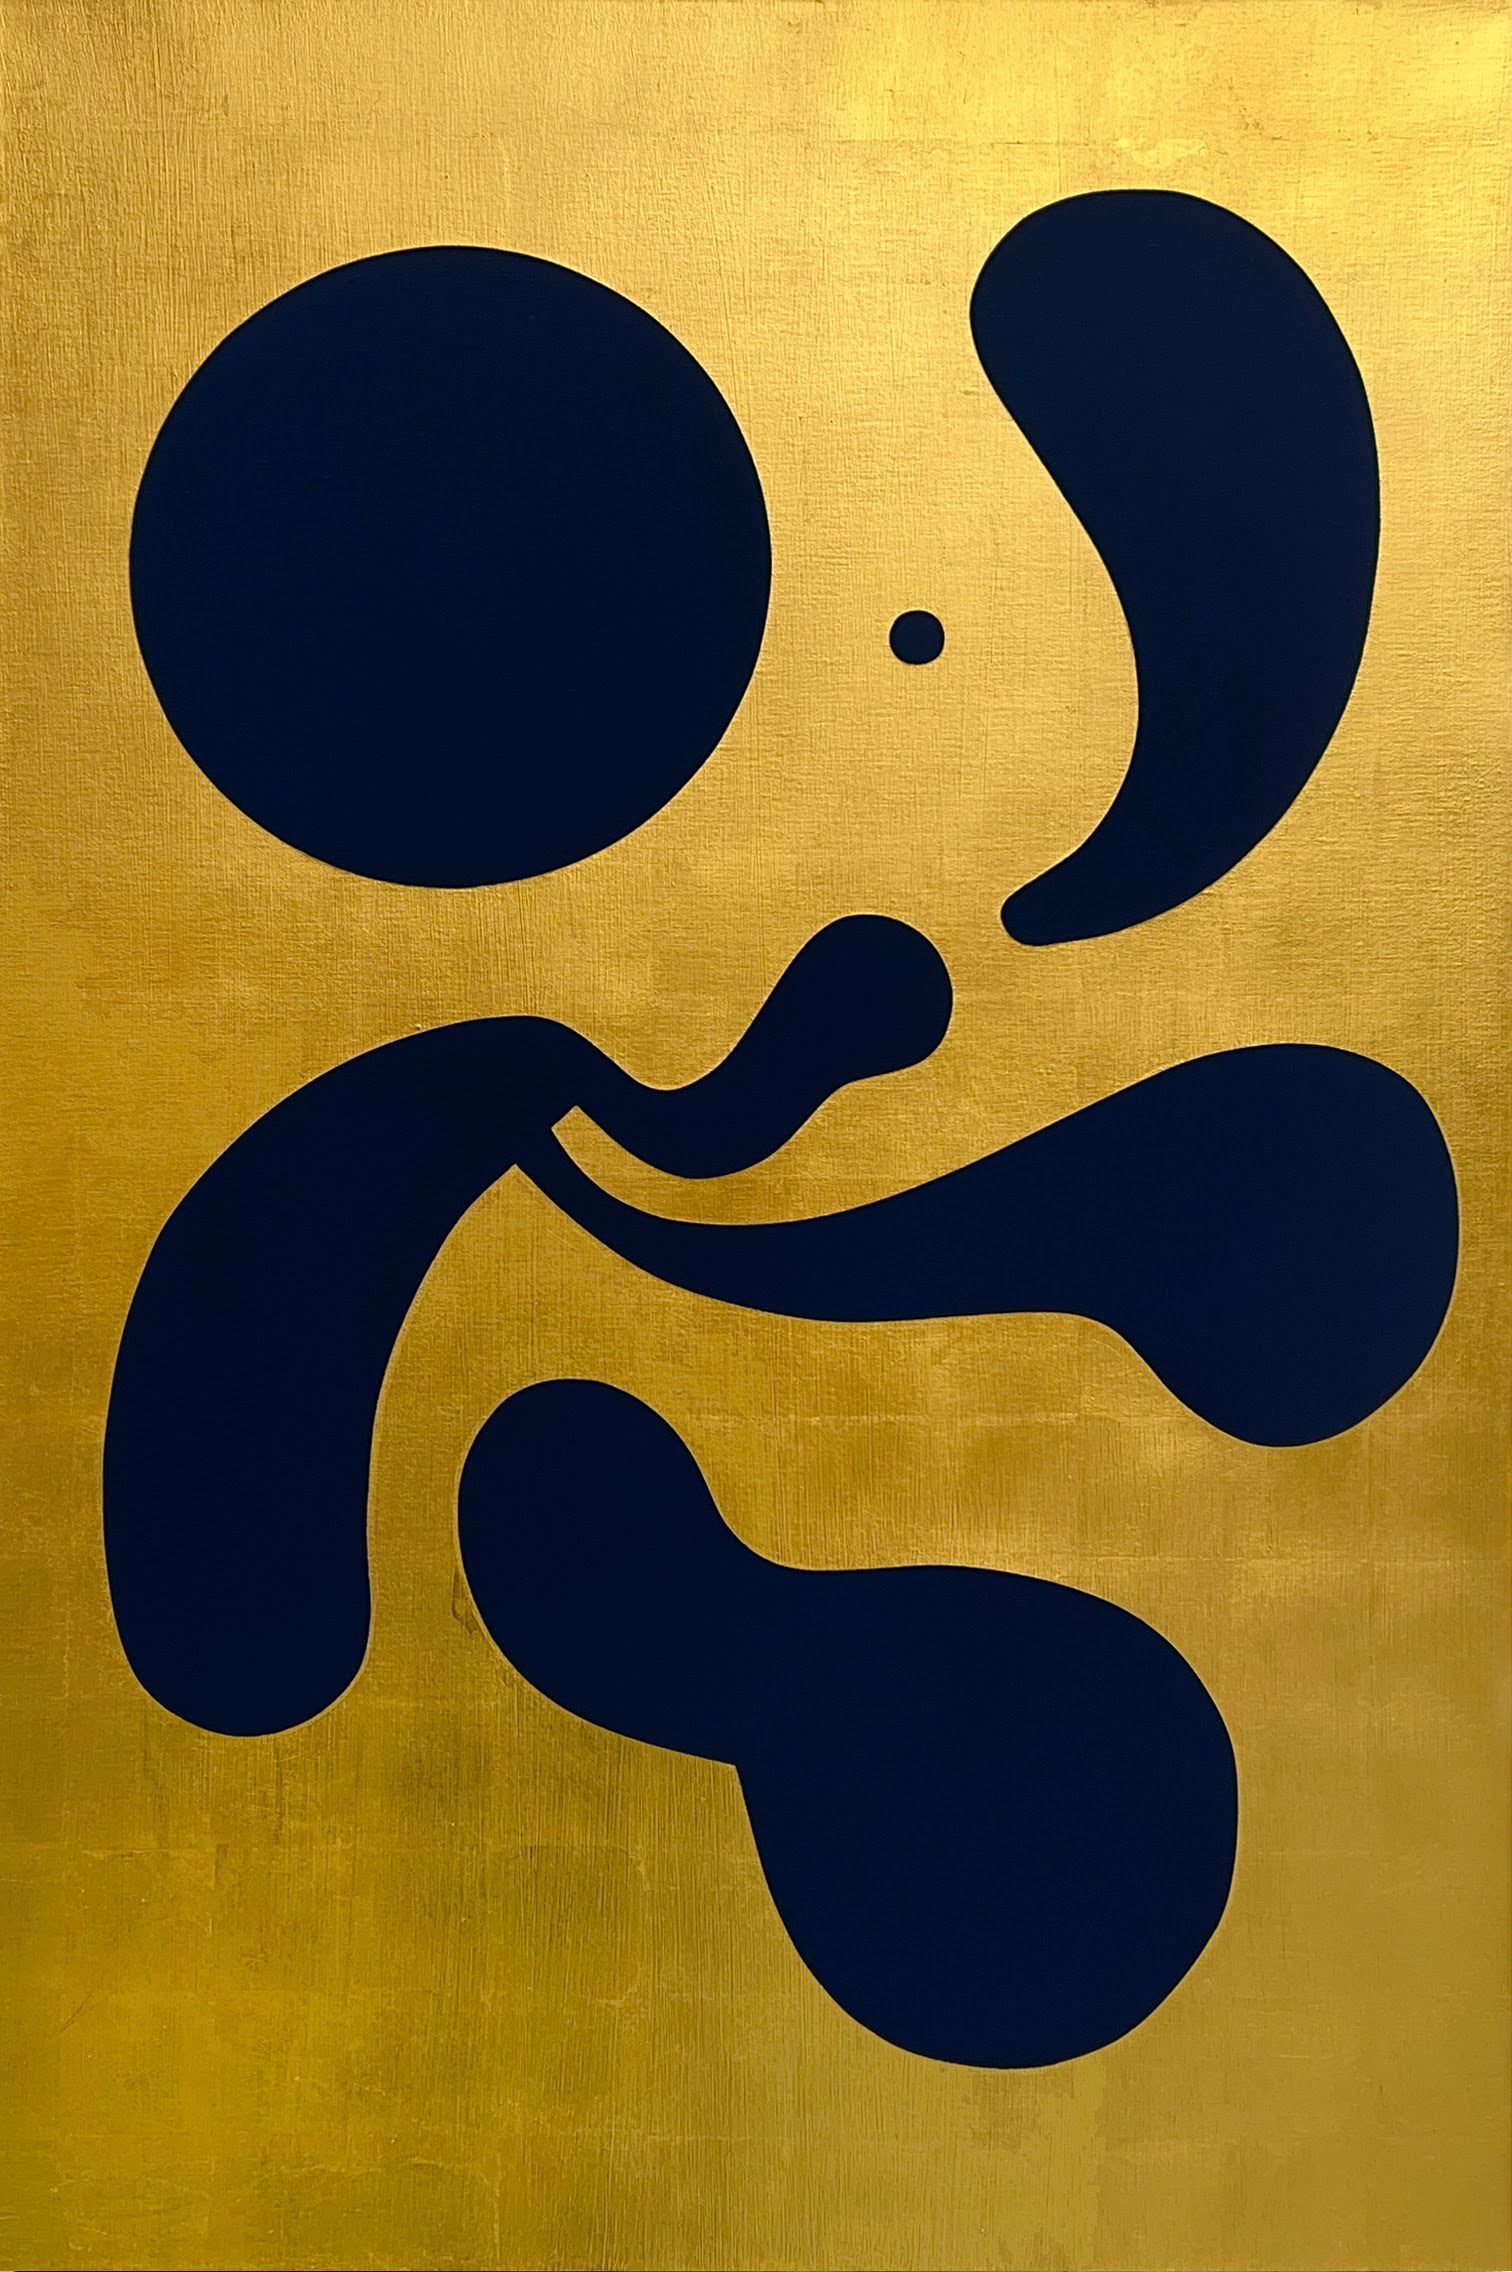 Circum, 2023 | Tempera and 24ct gold leaf on linen | 120 x 80 cm / 47 1/4 x 31 1/2 in